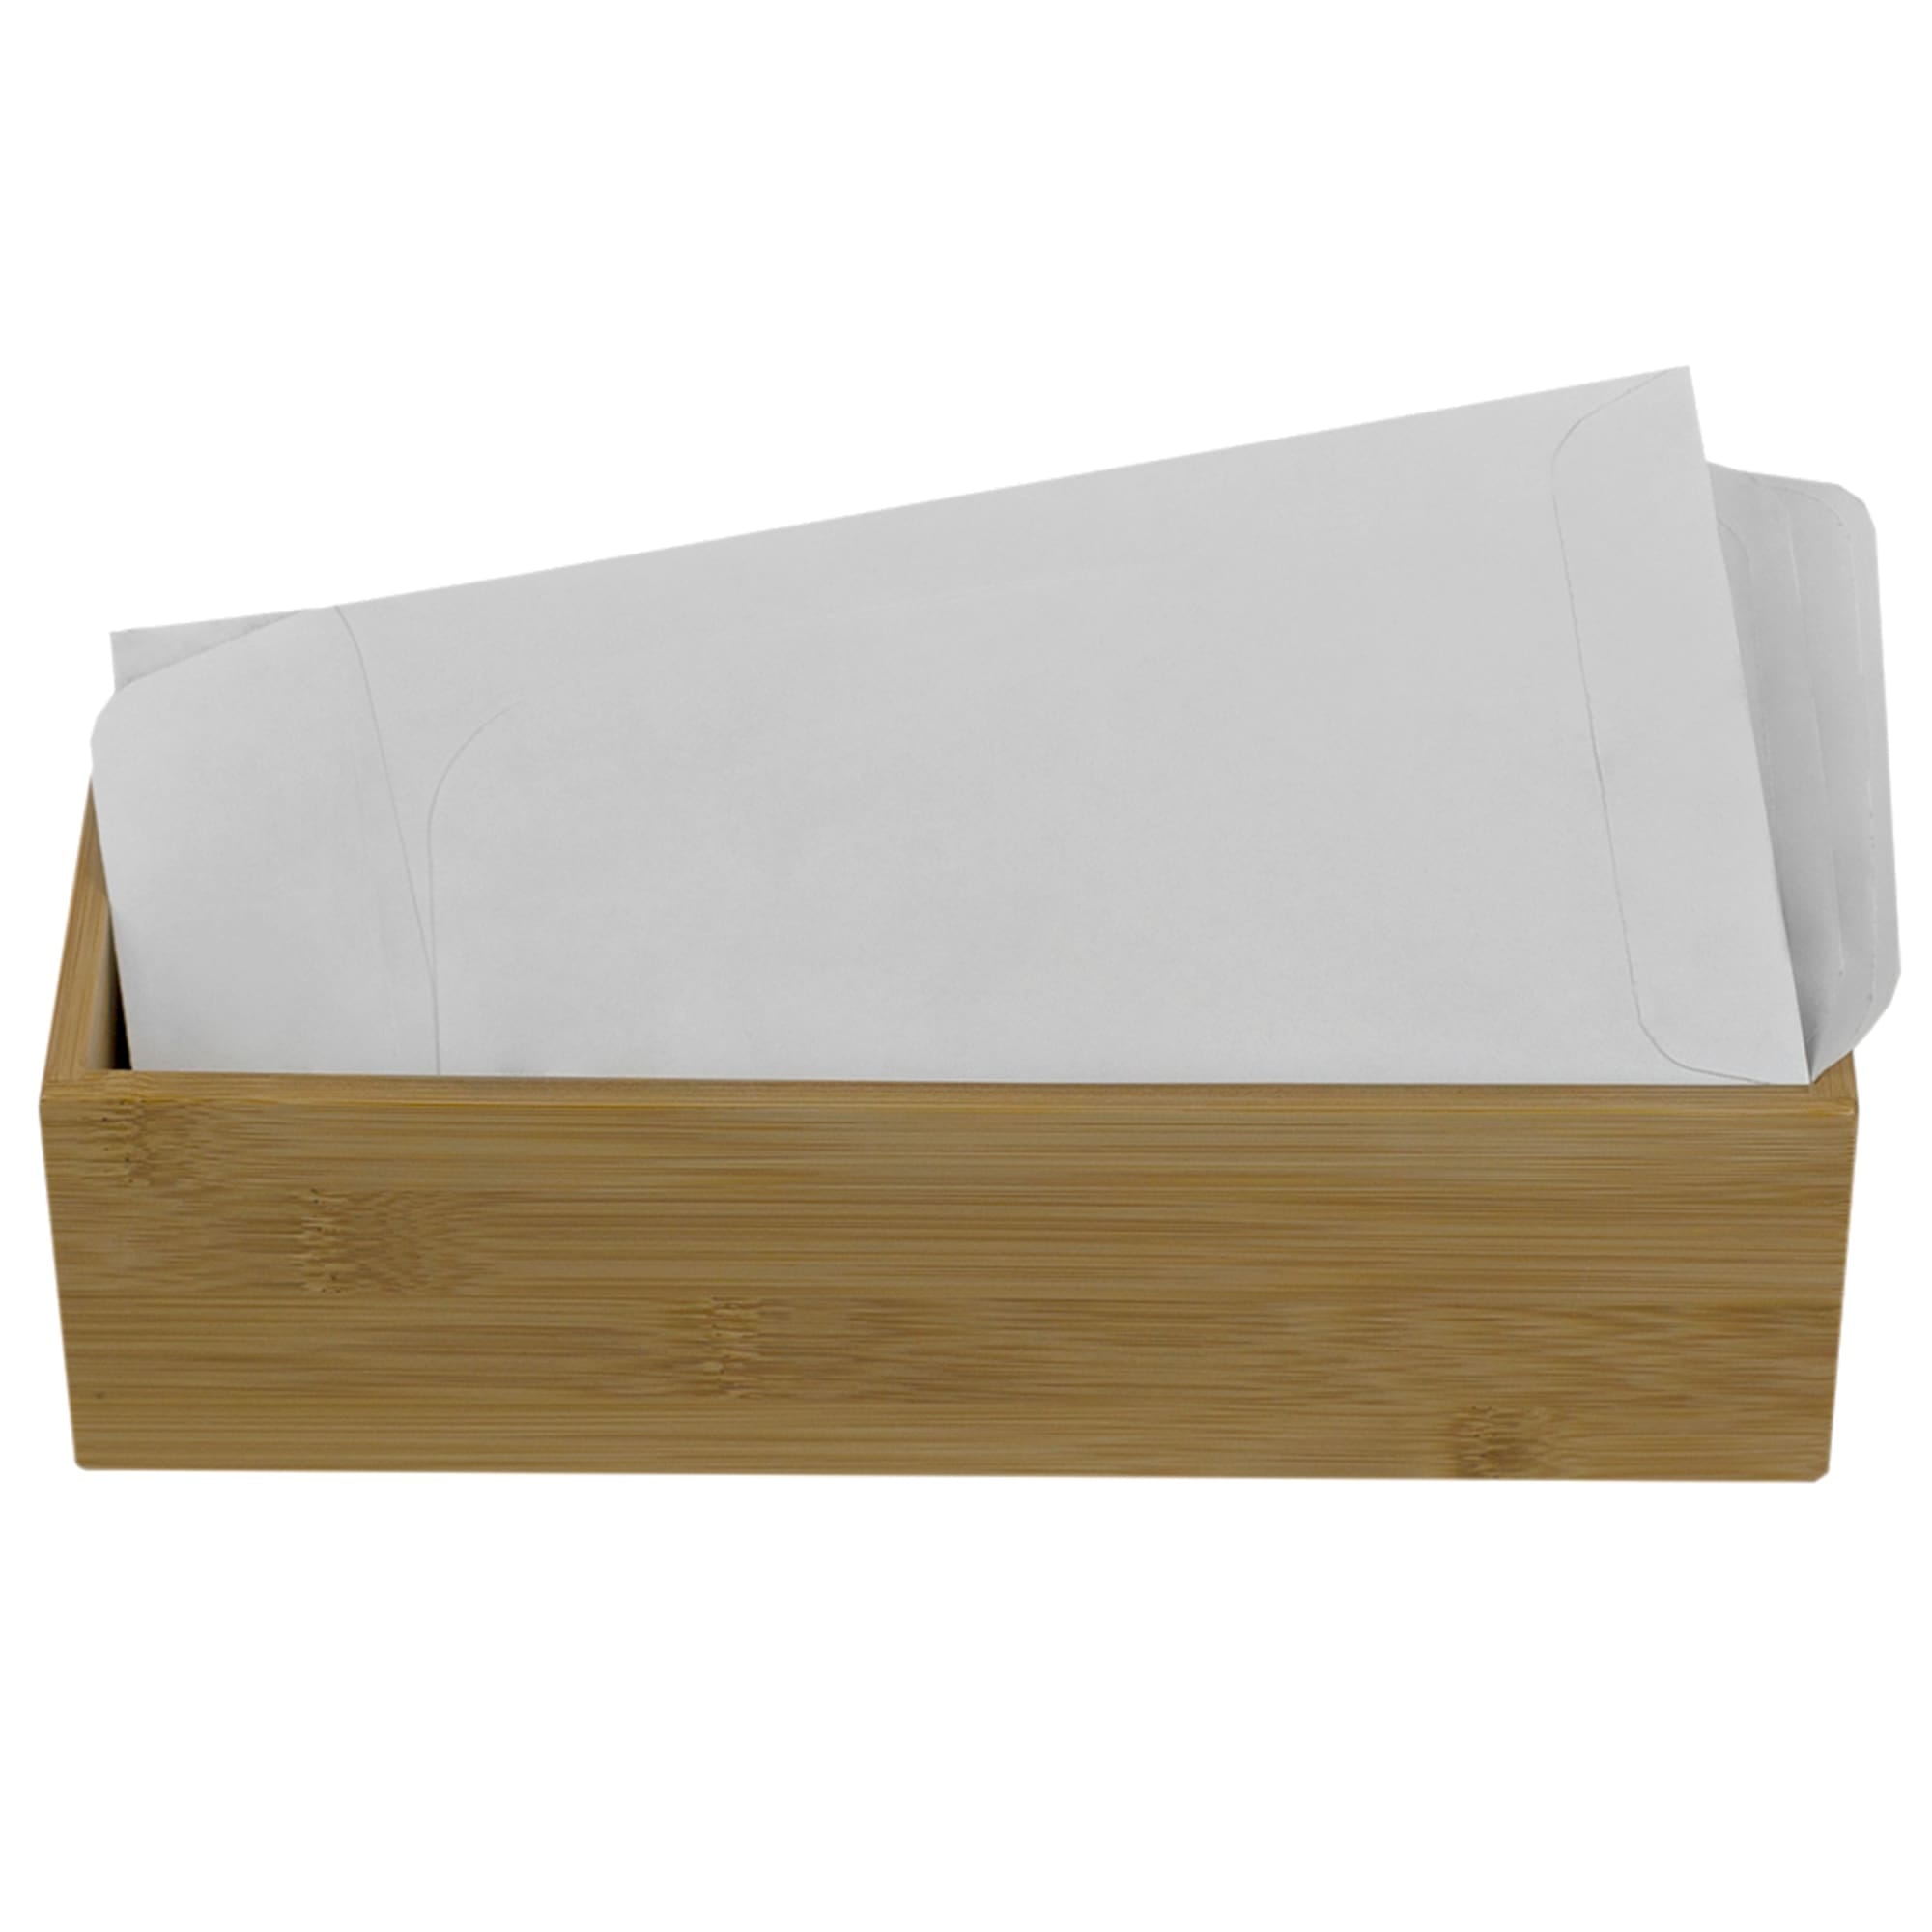 Home Basics 3" x 9" Bamboo Organizer, Natural $3.00 EACH, CASE PACK OF 12